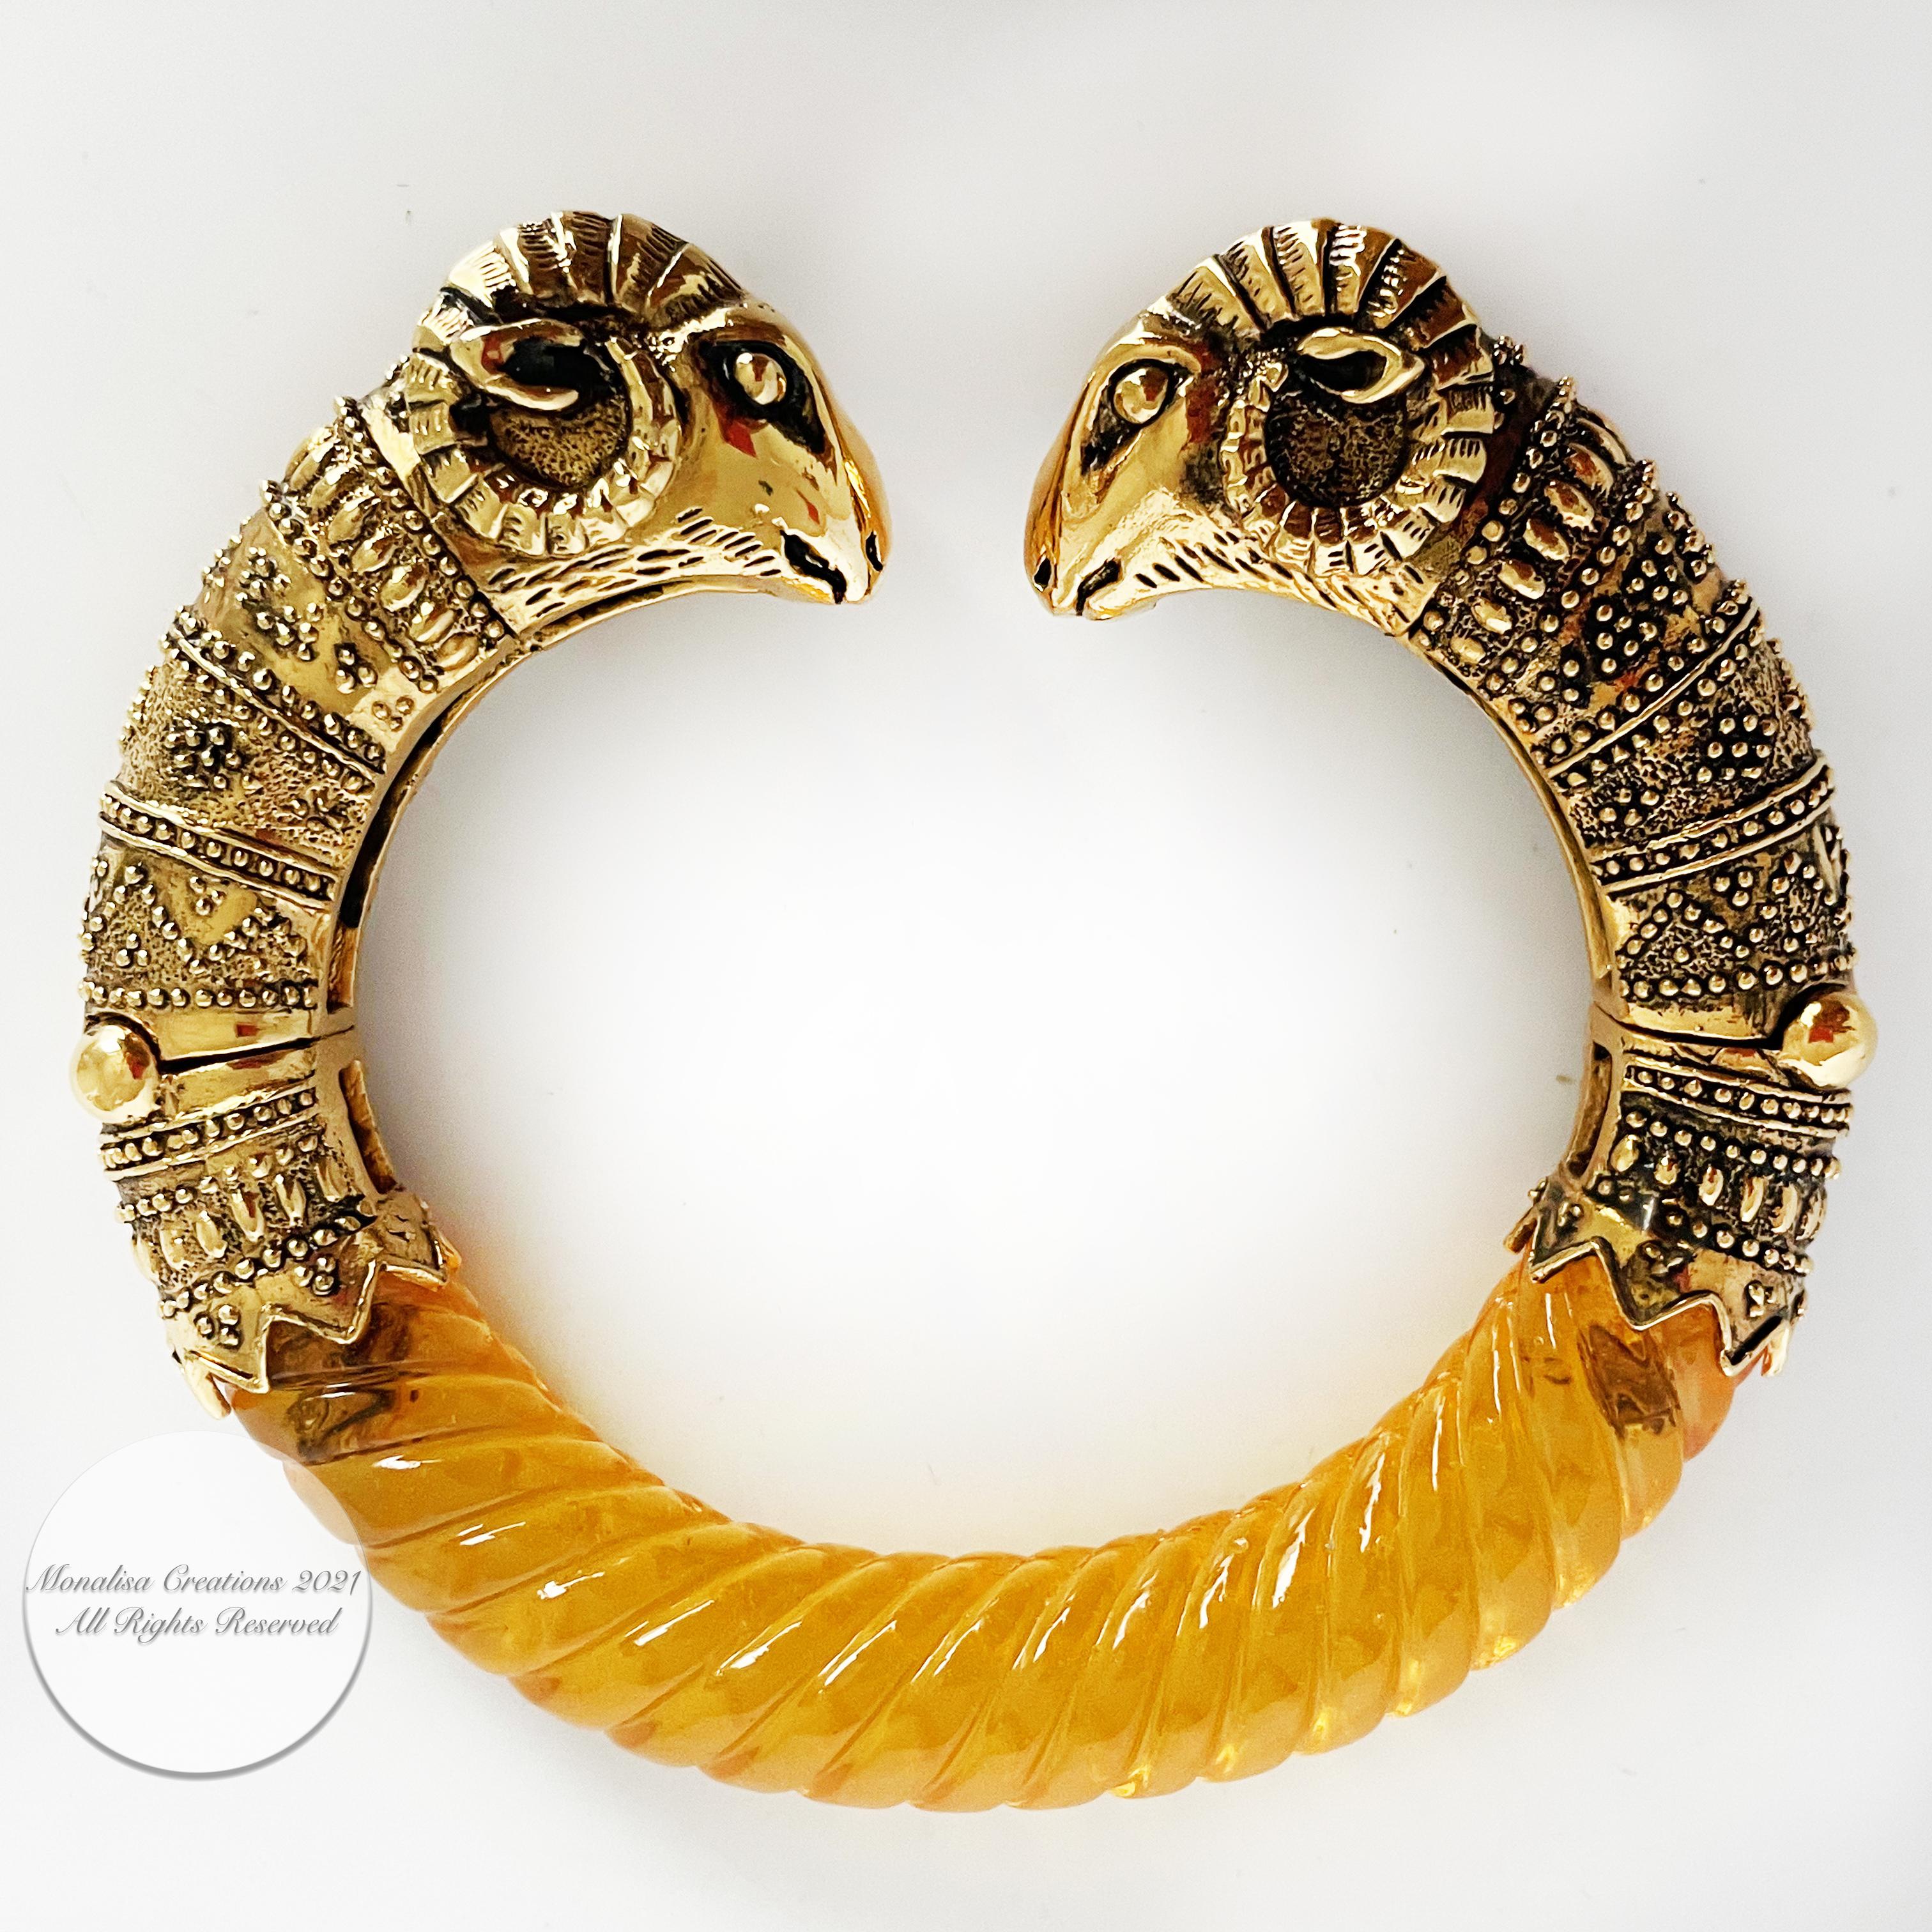 Incredibly beautiful double rams head bracelet, likely made in the 70s.  Made from gold metal and an amber-hued resin, the detailing on this piece is exquisite.  Clamper style, with articulation at the base of each ram head.  No manufacturer stamp